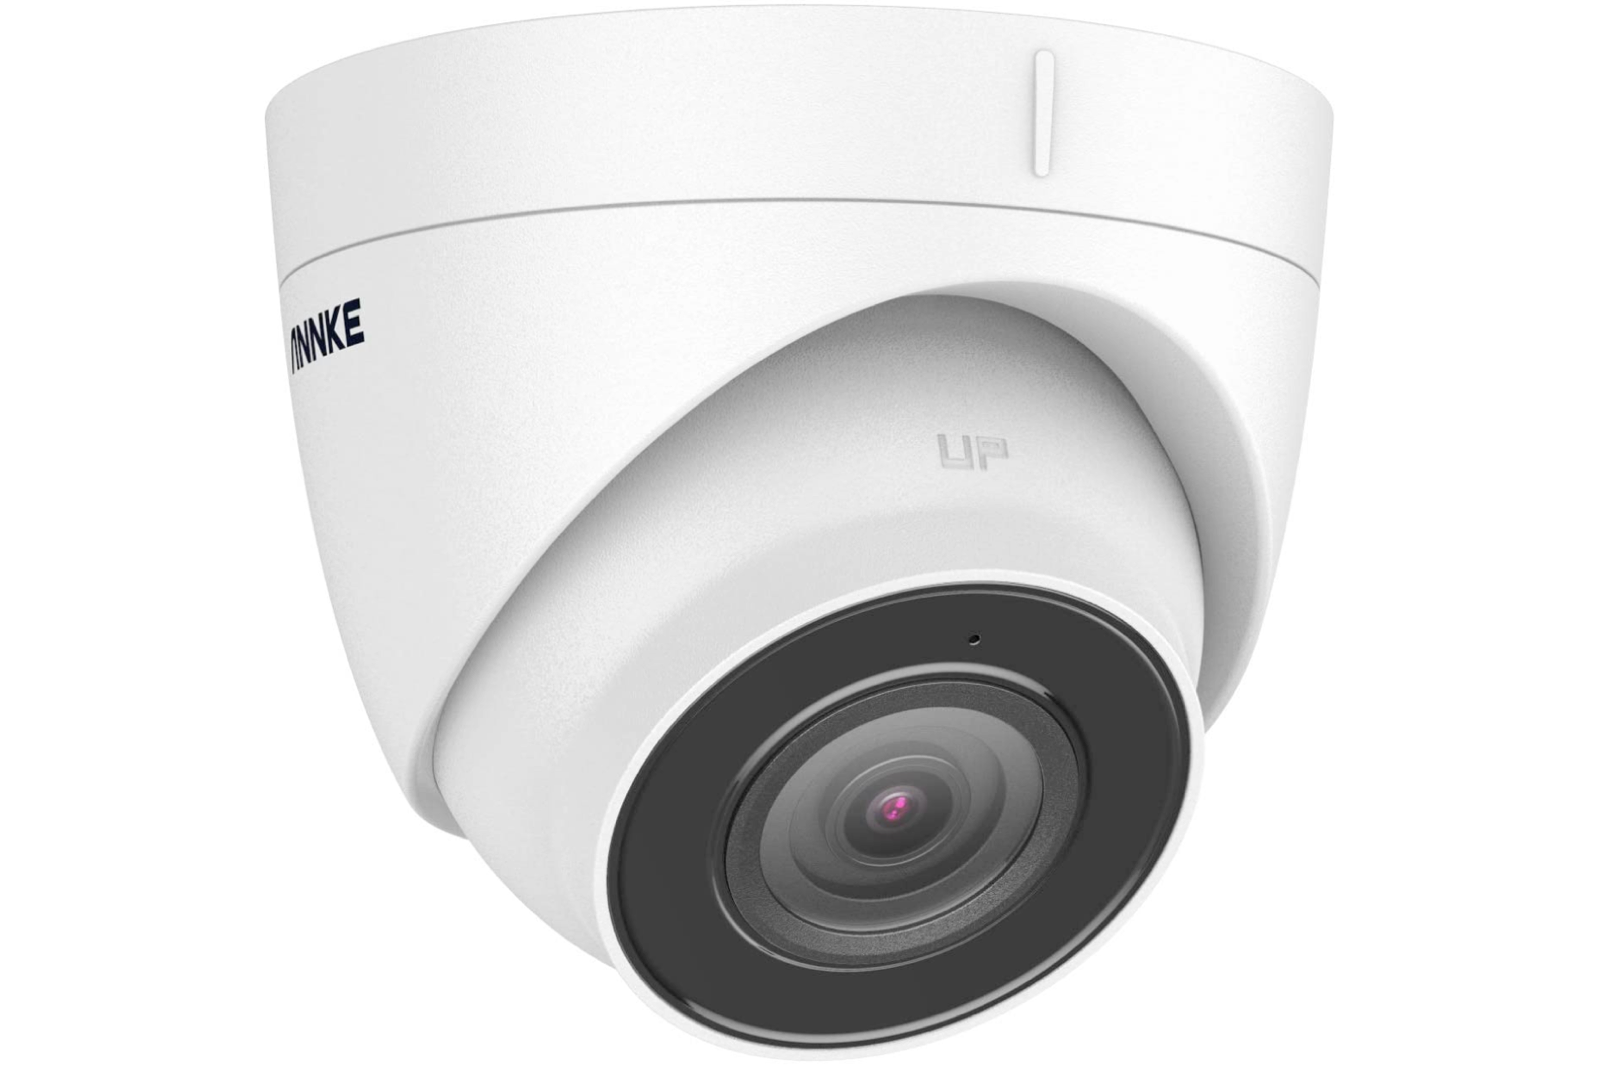 Annke home security deals for Prime Day photo 18